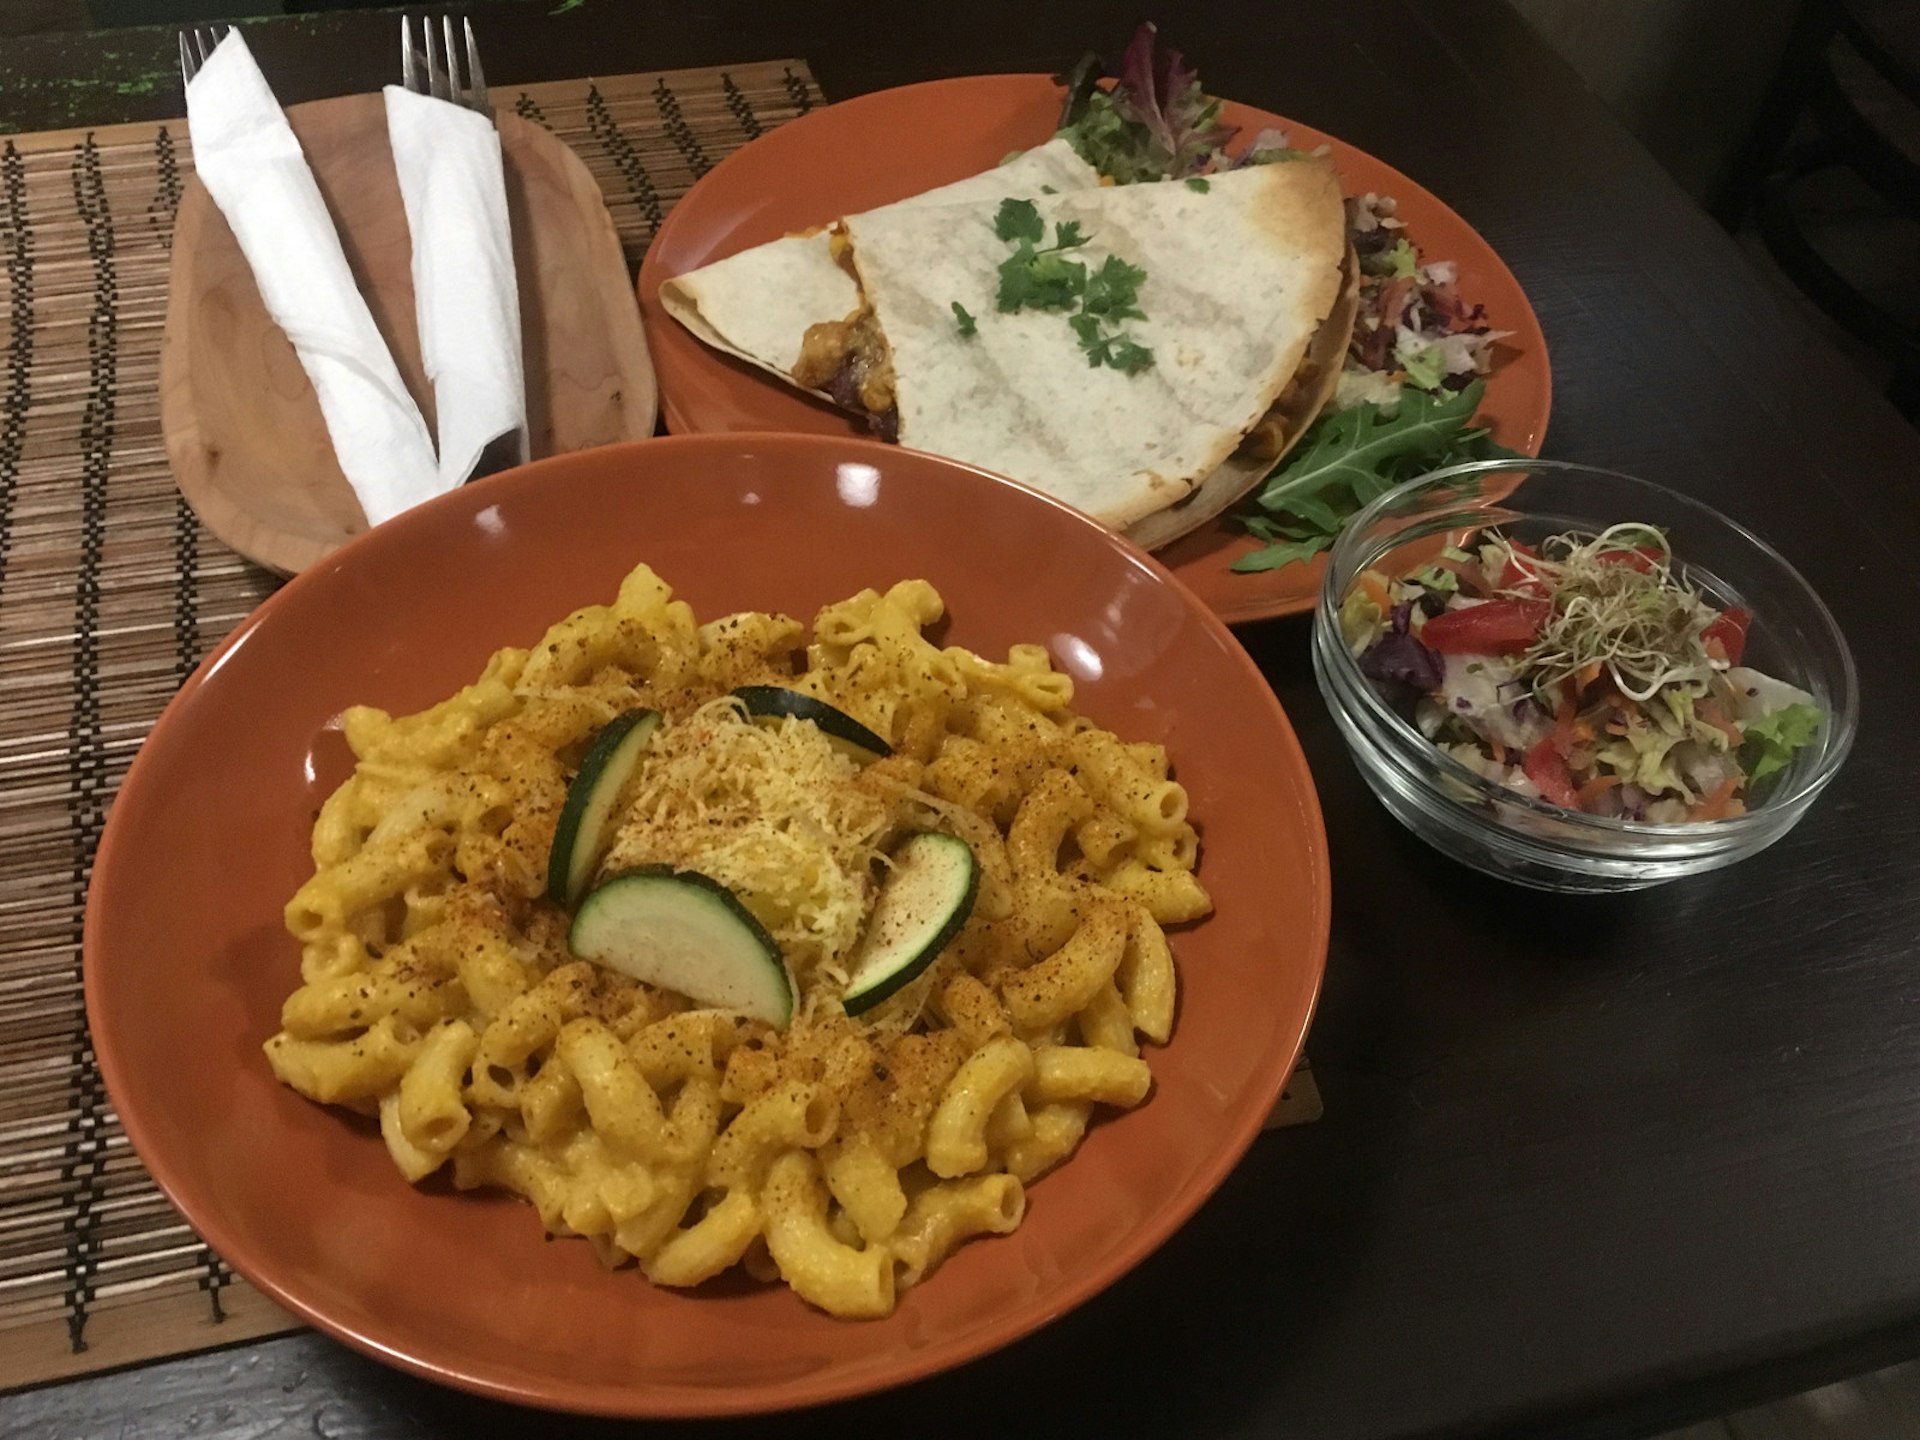 Vegan macaroni and cheese and quesadilla served at Koszmosz restaurant © Jennifer Walker / Lonely Planet